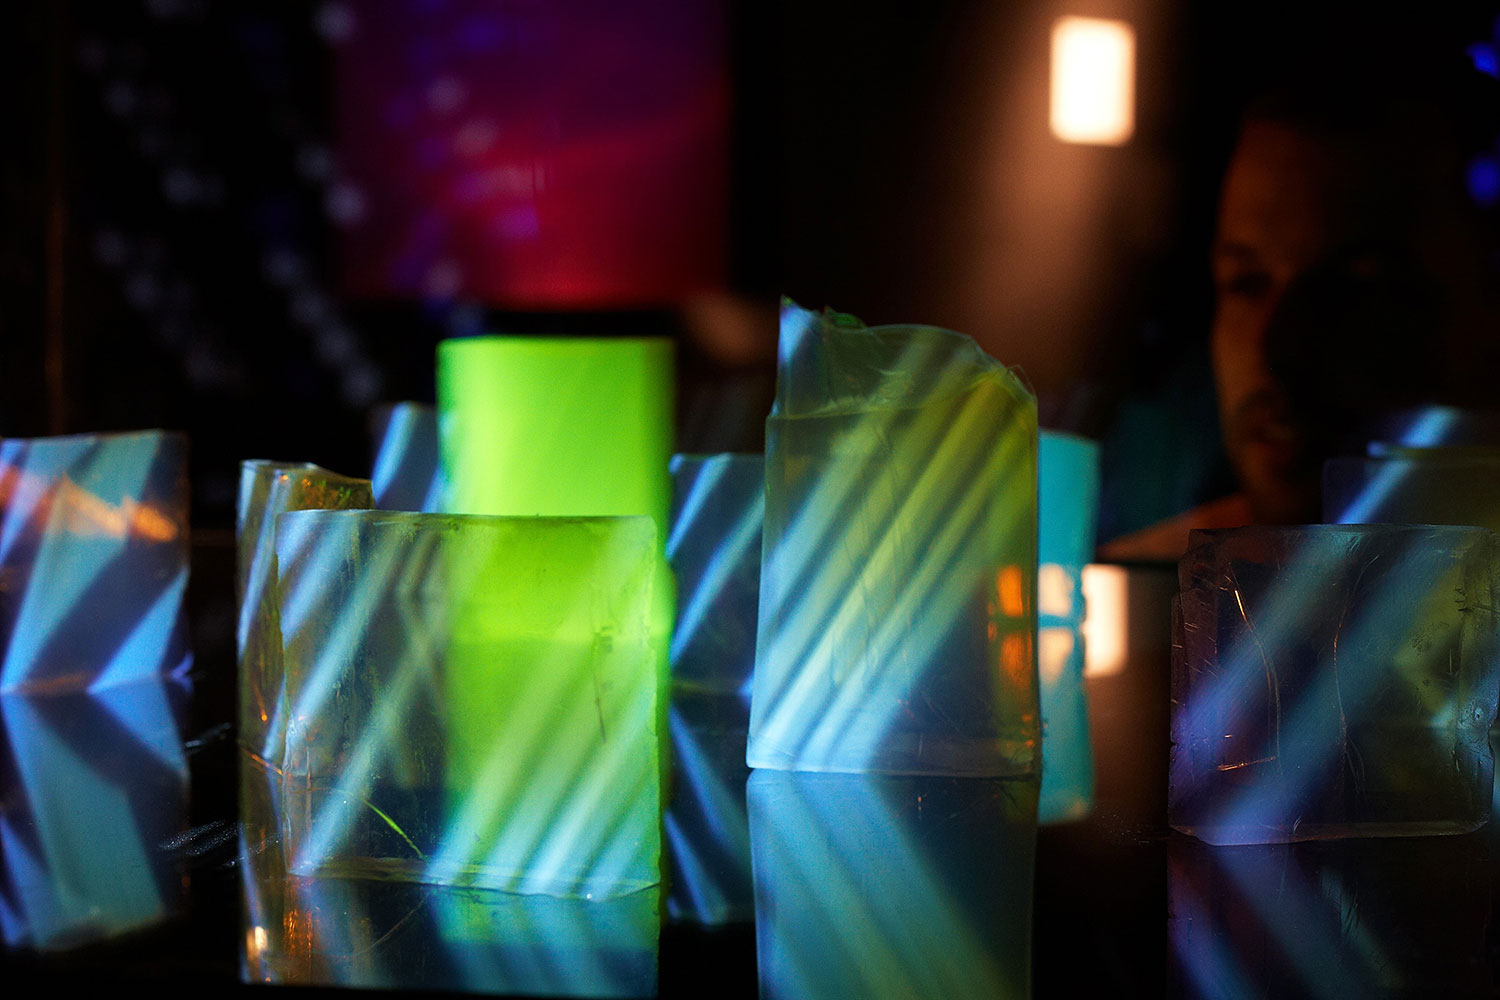   Aerogel Sculptures    Projections on 99.8% air    more  